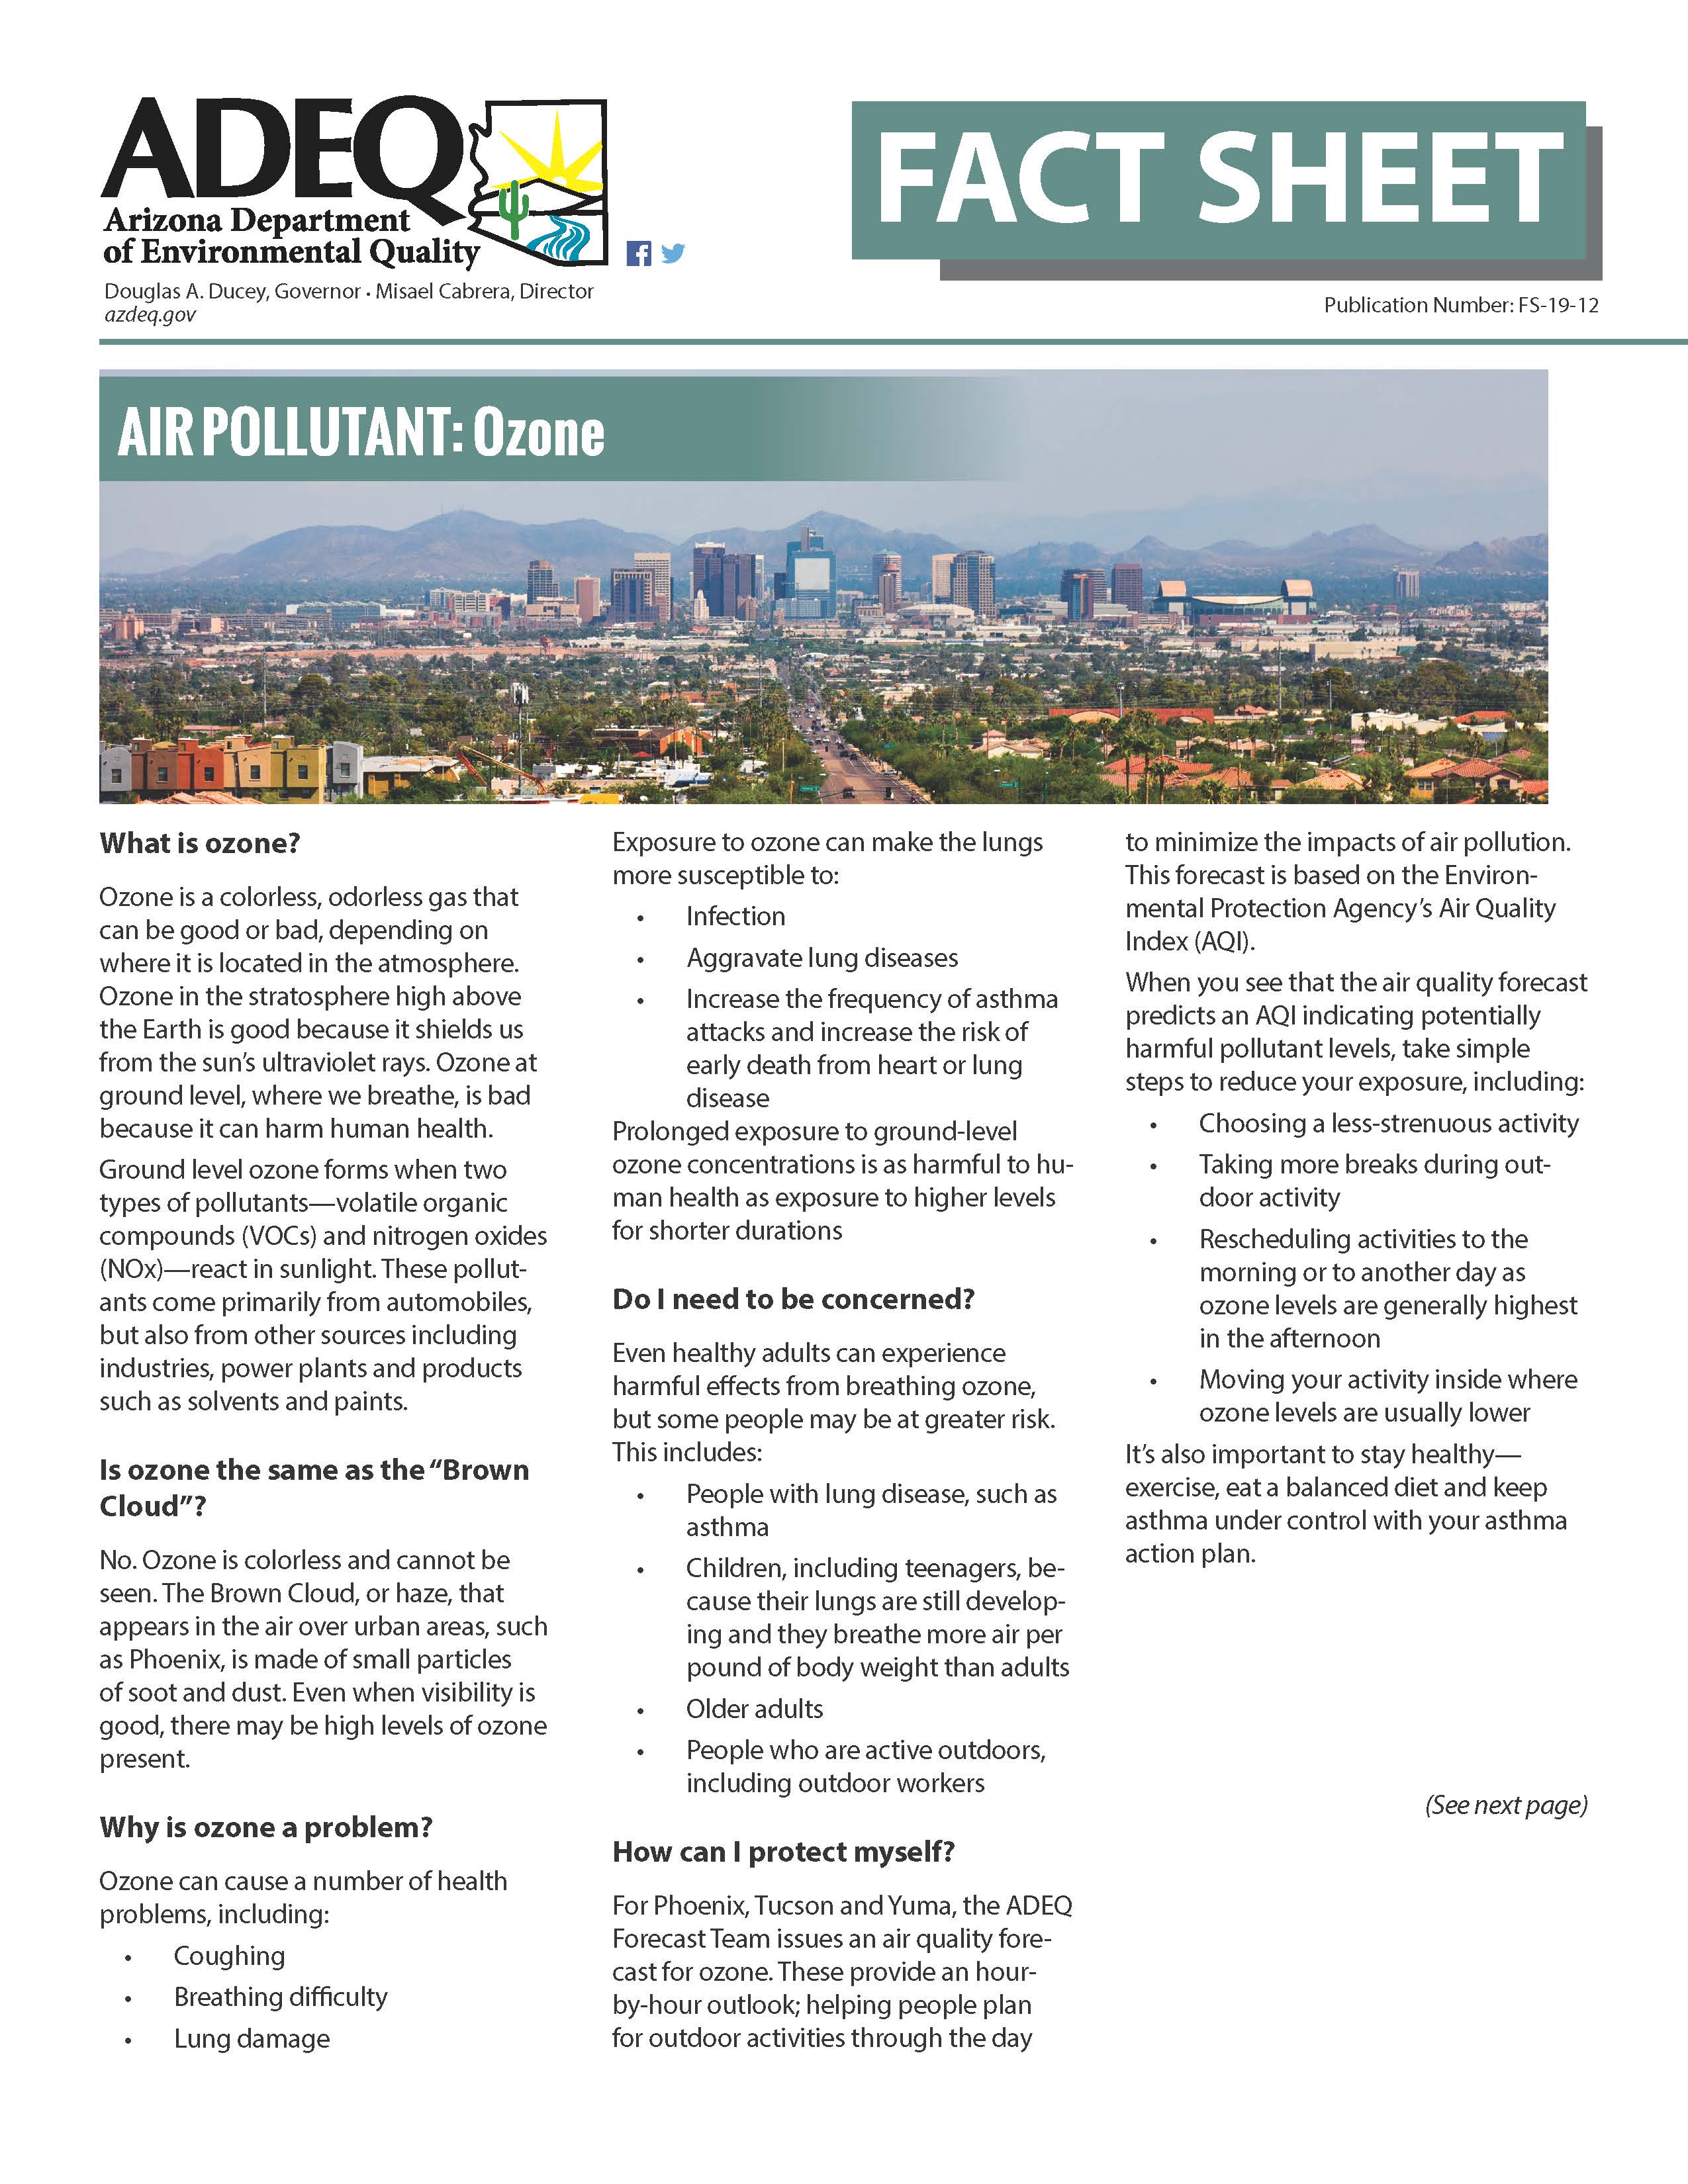 This is page 1 of the Ozone Fact Sheet from the Arizona Department of Air Quality